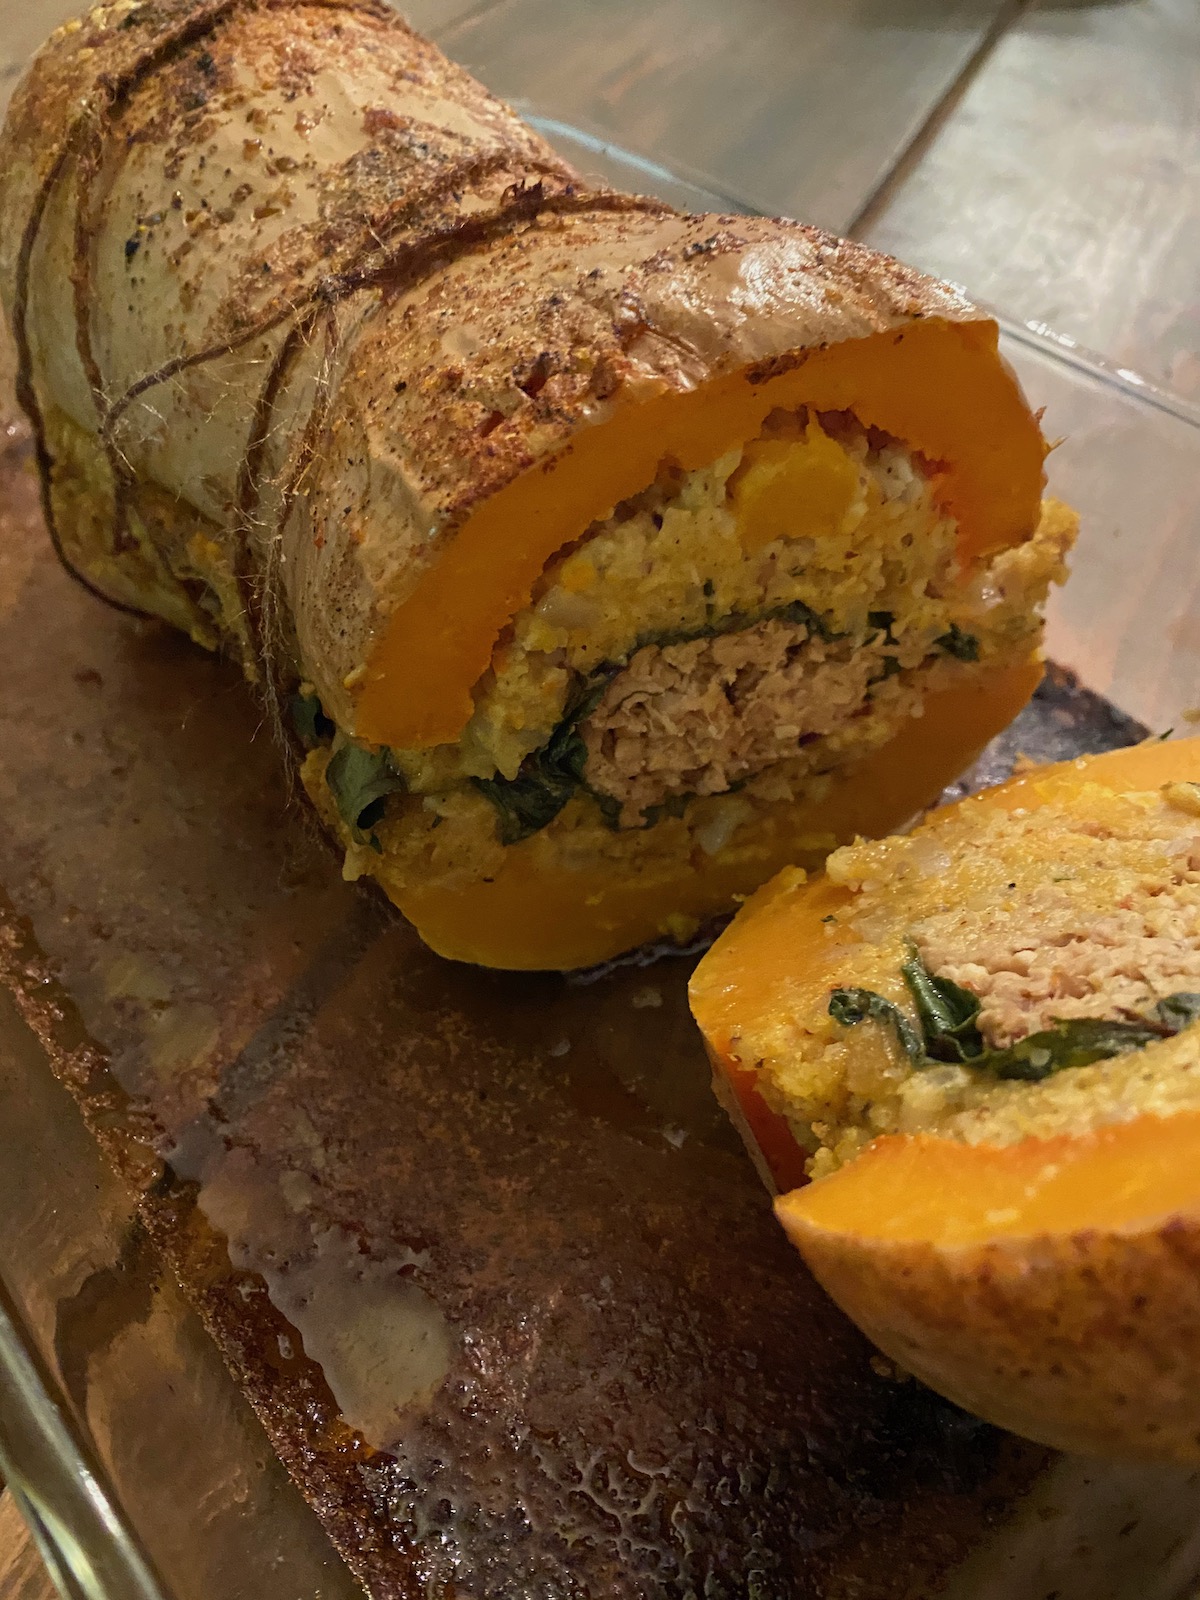 “Butterball” Butternut Squash with Brazil nut and Tempeh Stuffing